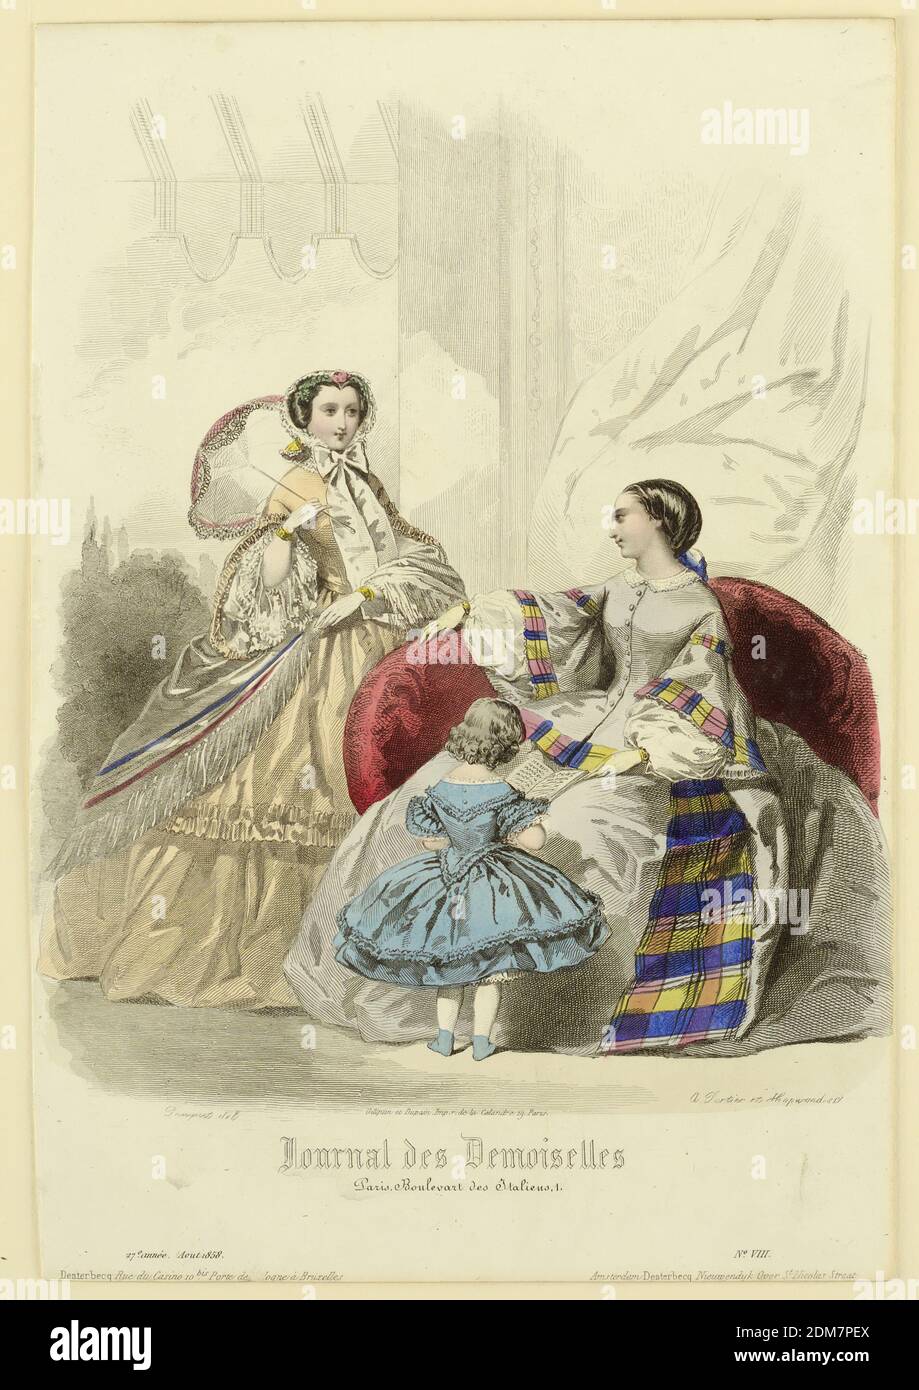 Fashion Plate from Journal des demoiselles, A. Pauquet, French, active 19th c., Gilguin & Dupain, French, active 19th c., A. Portier, French, active 19th c., Hopwood, active 19th c., Hand-colored engraving on paper, Fashion plate from Journal des demoiselles., Paris, France, August 1858, Print Stock Photo